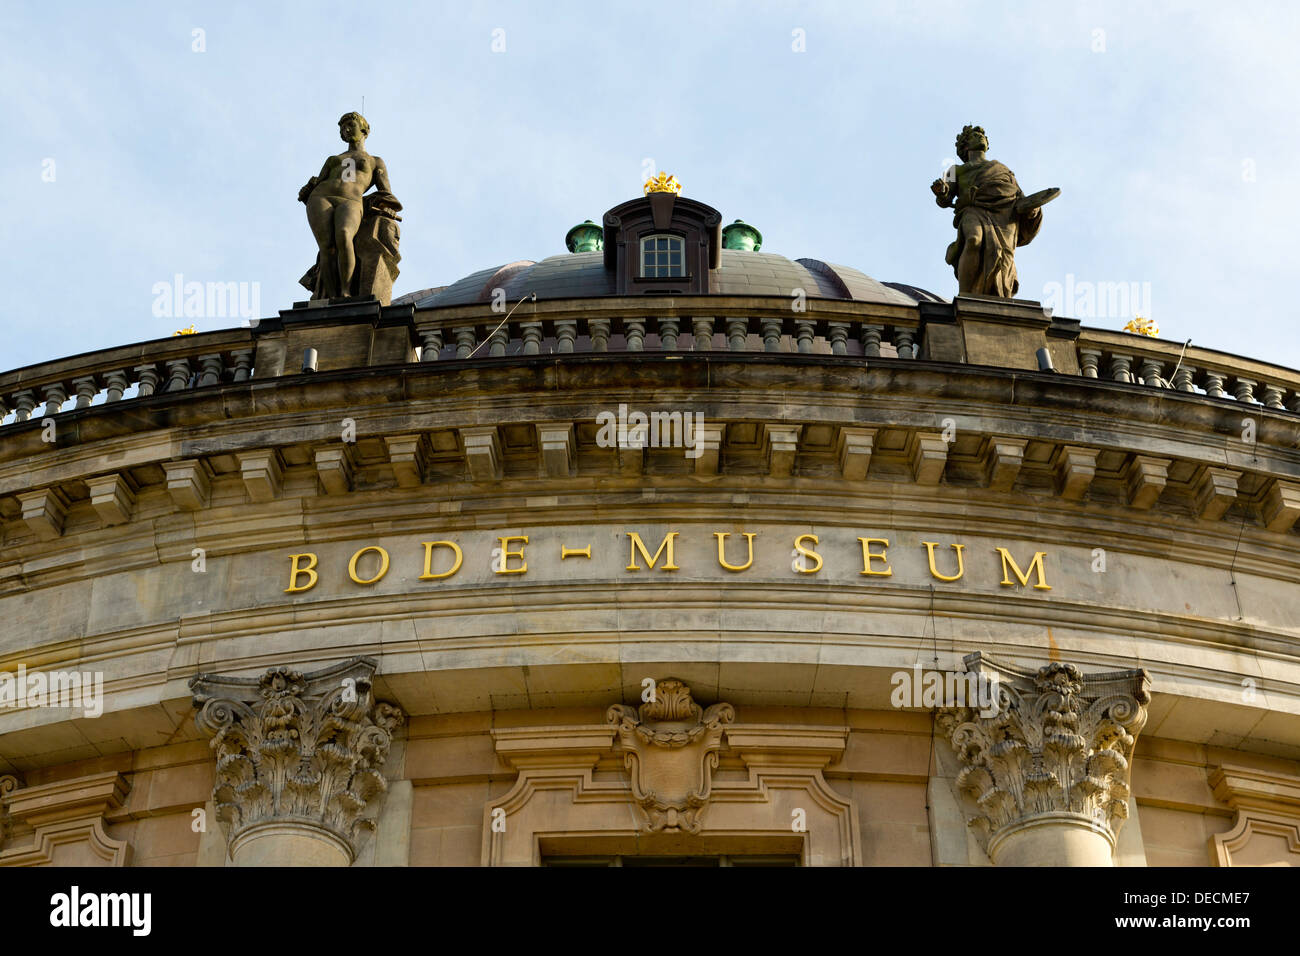 The Bode Museum in Berlin Mitte Stock Photo